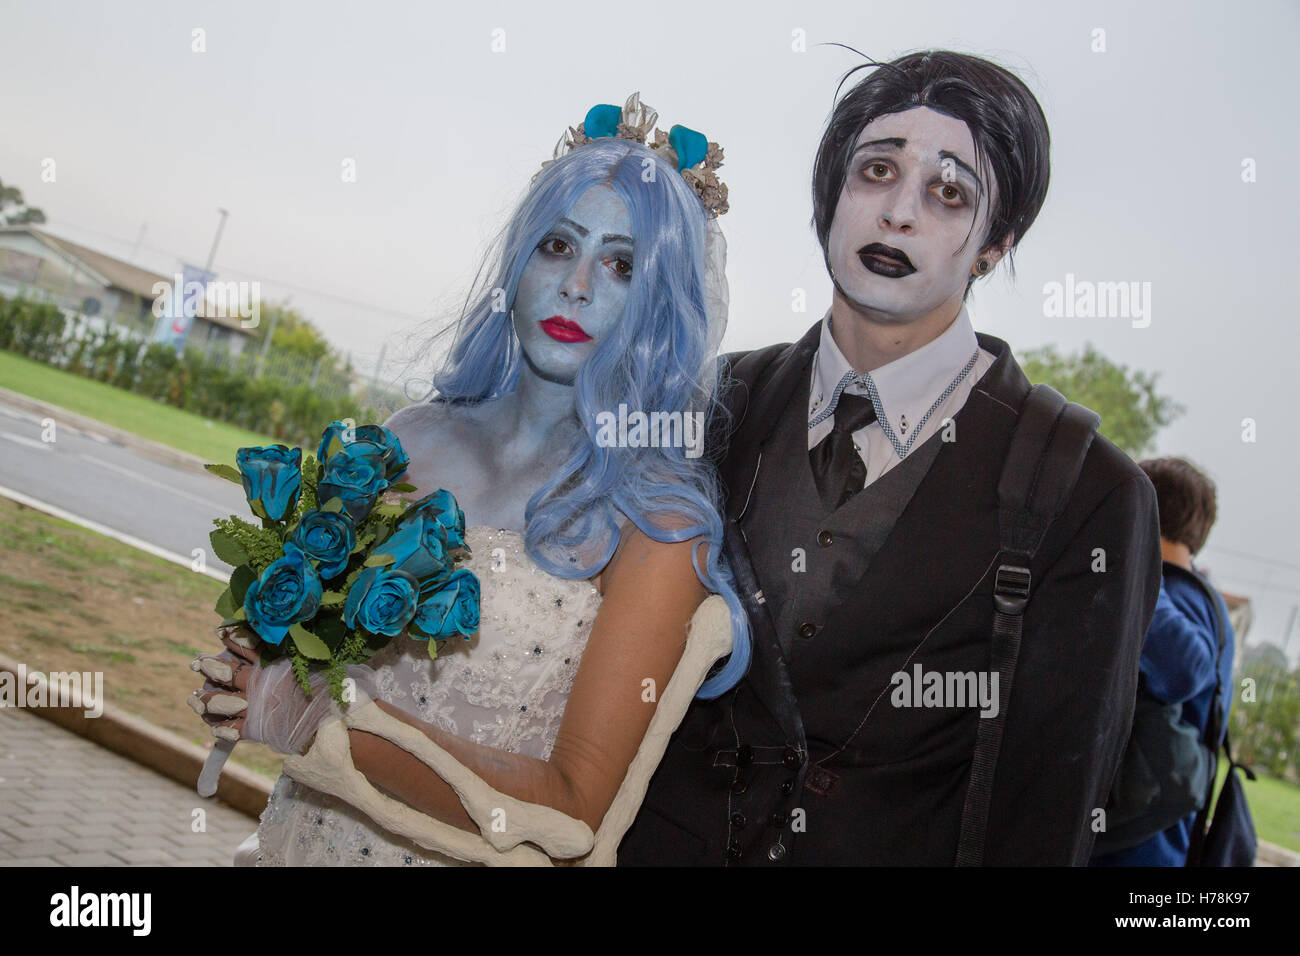 Characters from The Corpse Bride at the Romics convention, XX Edition, on the Nuova Fiera Di Roma, Via Portuense, Rome.  Where: Rome, Italy When: 01 Oct 2016 Credit: IPA/WENN.com  **Only available for publication in UK, USA, Germany, Austria, Switzerland* Stock Photo